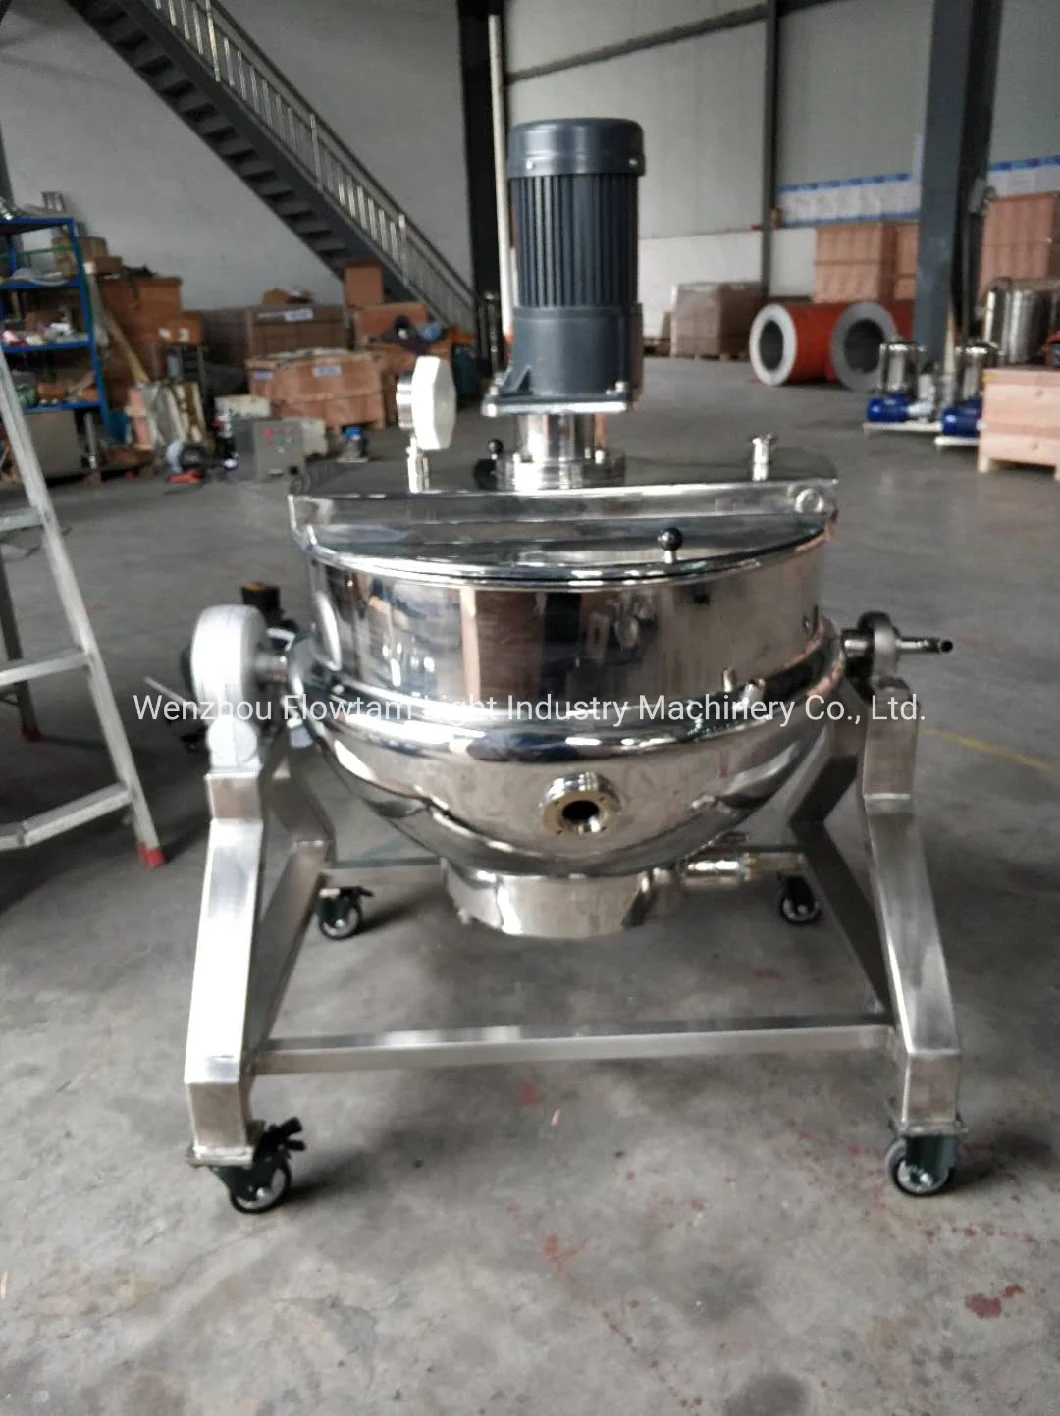 Excellent Stainless Steel Tilting Electric Heating Jacket Kettle Cooking Pot